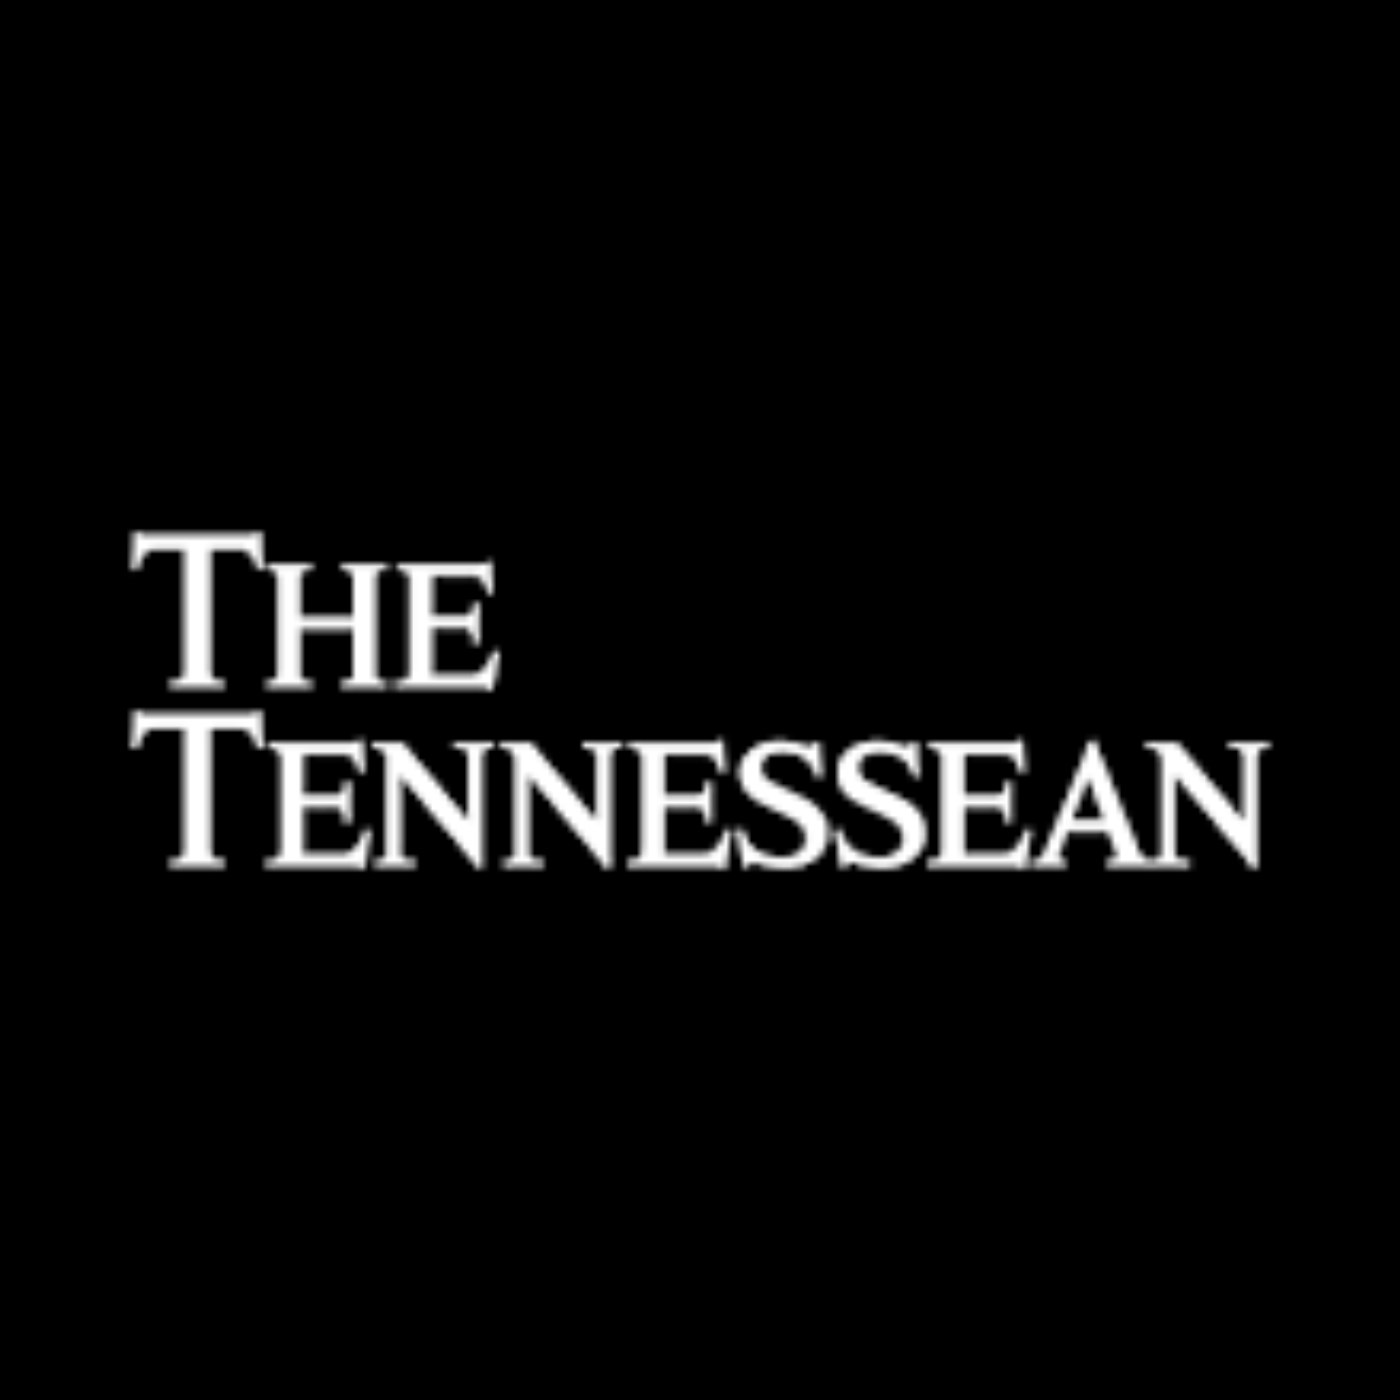 The tennessean logo on a black background.